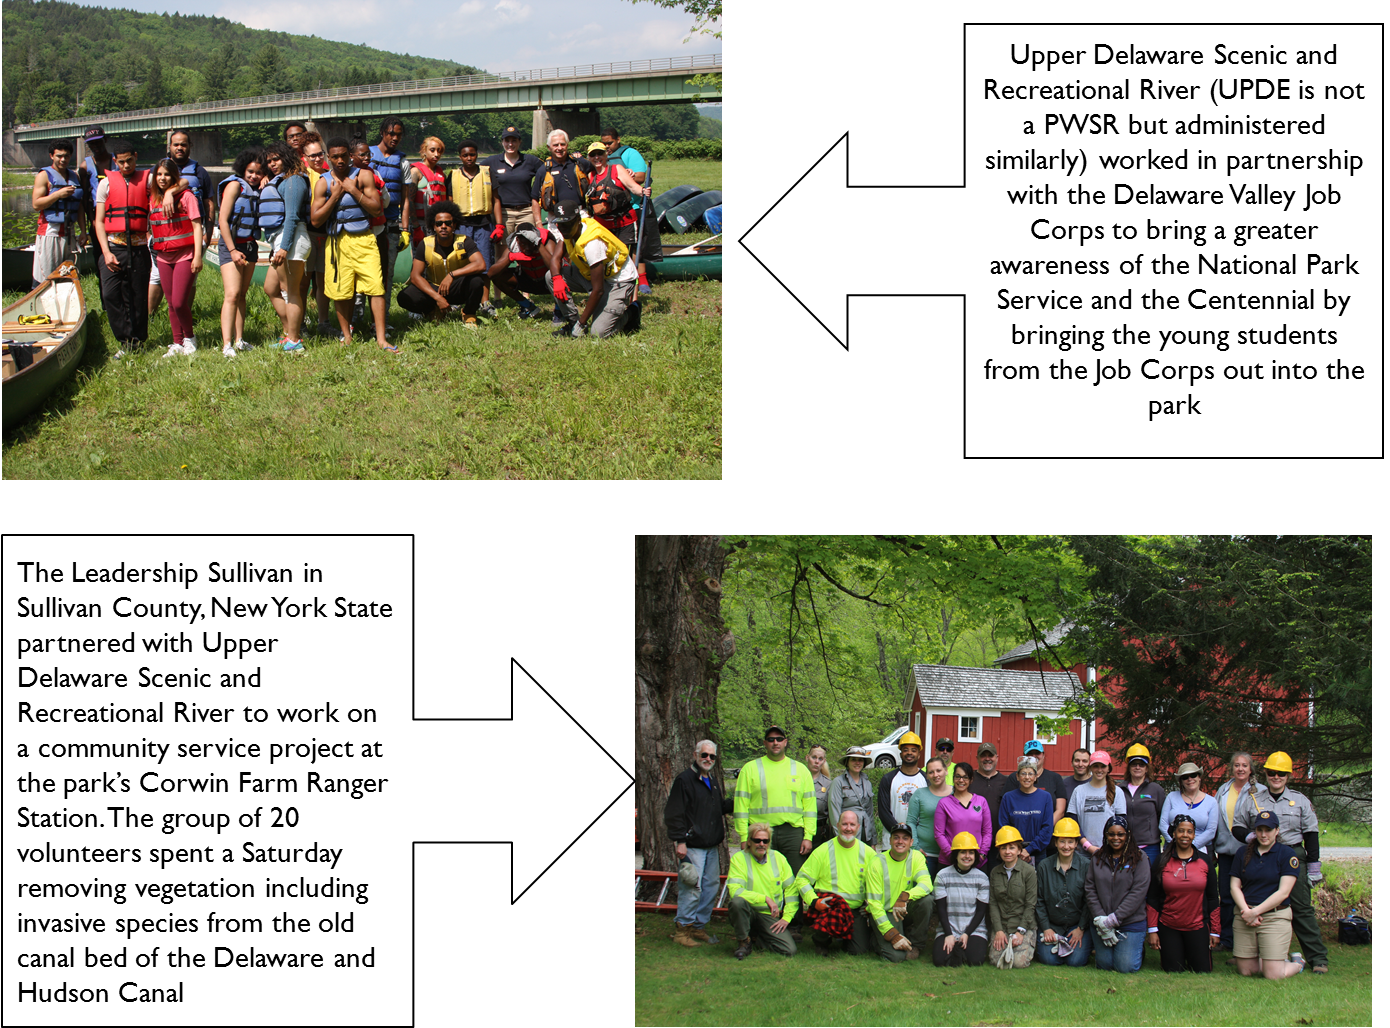 A group photo of a cohort of Delaware Valley Job Corps members with an arrow pointing to it with a caption reading ‘Upper Delaware Scenic and Recreation River (UPDE is not a PWSR but administered similarly) worked in partnership with the Delaware Valley Job Corps to bring a greater awareness of the National Park Service and the Centennial by bringing the young students from the Job Corps out into the park. Another photo depicts a group of 20 volunteers on the Upper Delaware Scenic and Recreational River. An arrow points to the photo with a caption reading ‘The Leadership Sullivan in Sullivan County. New York State partnered with Upper Delaware Scenic and Recreational River to work on a community service project at the park’s Corwin Farm Ranger Station. The group of 20 volunteers spent a Saturday removing vegetation including invasive species from the old canal bed of the Delaware and Hudson Canal.